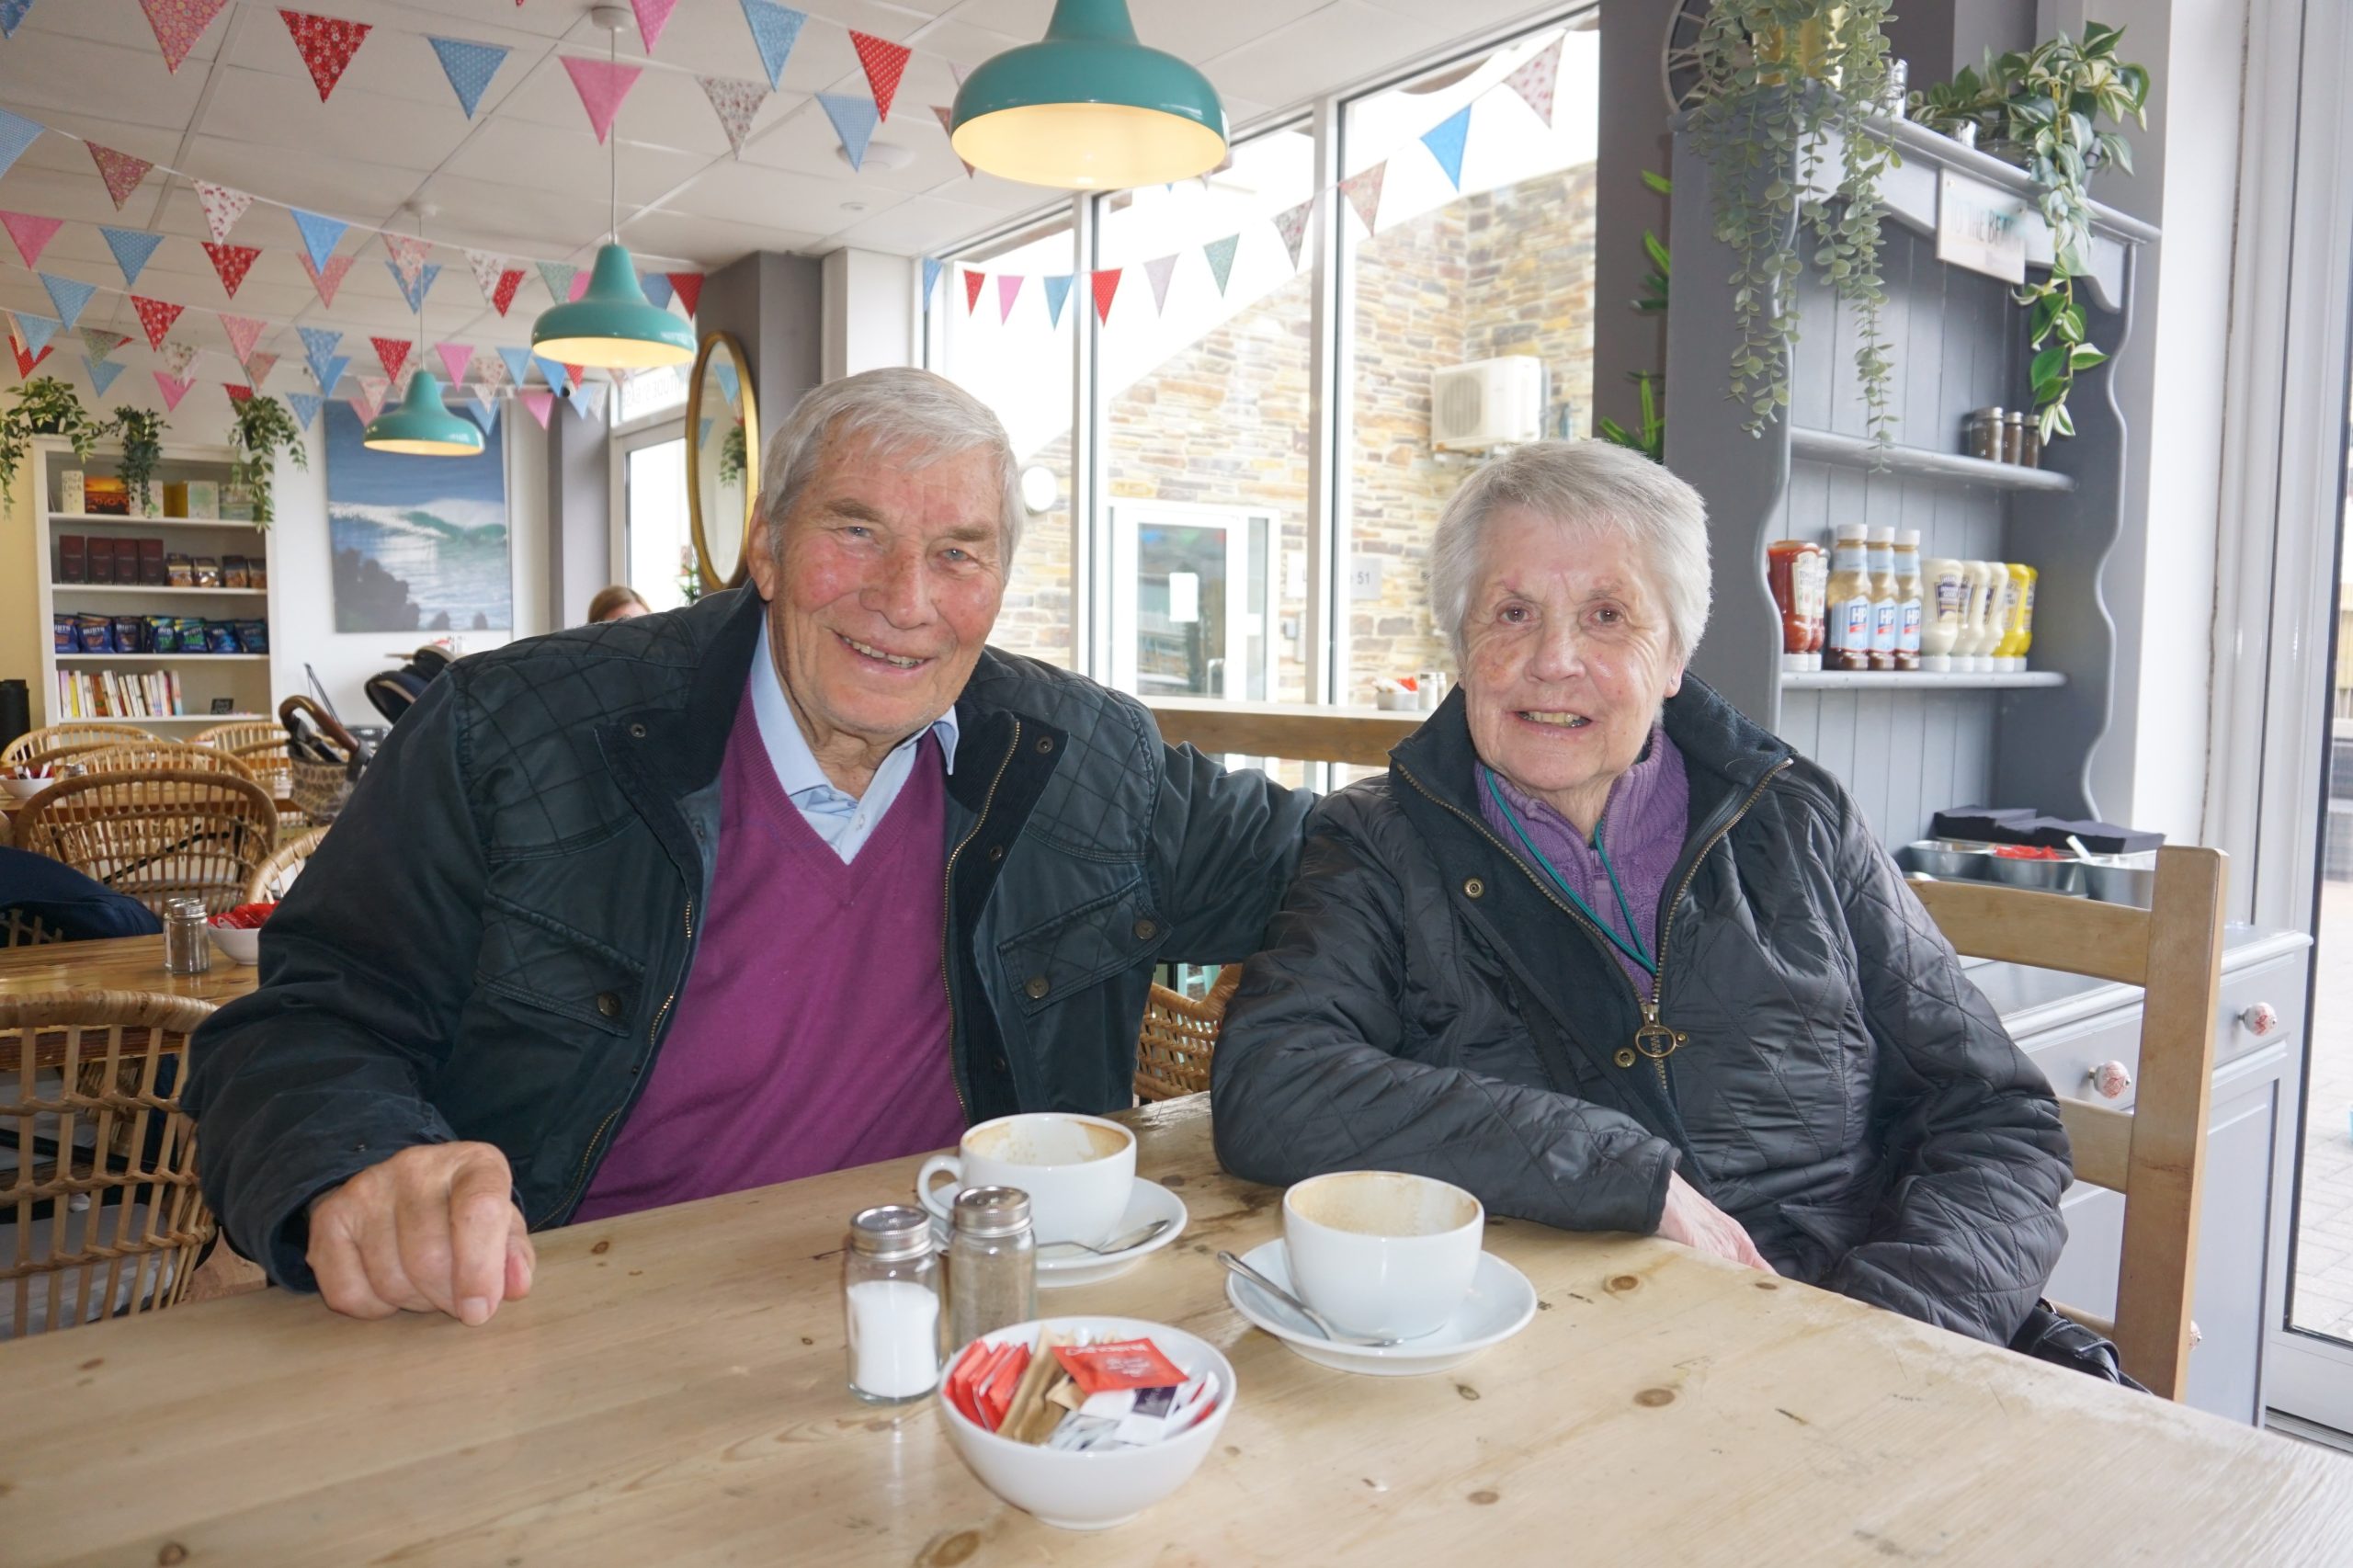 Hugh and Sheila Bone believe the lack of party politics helps the council to get things done